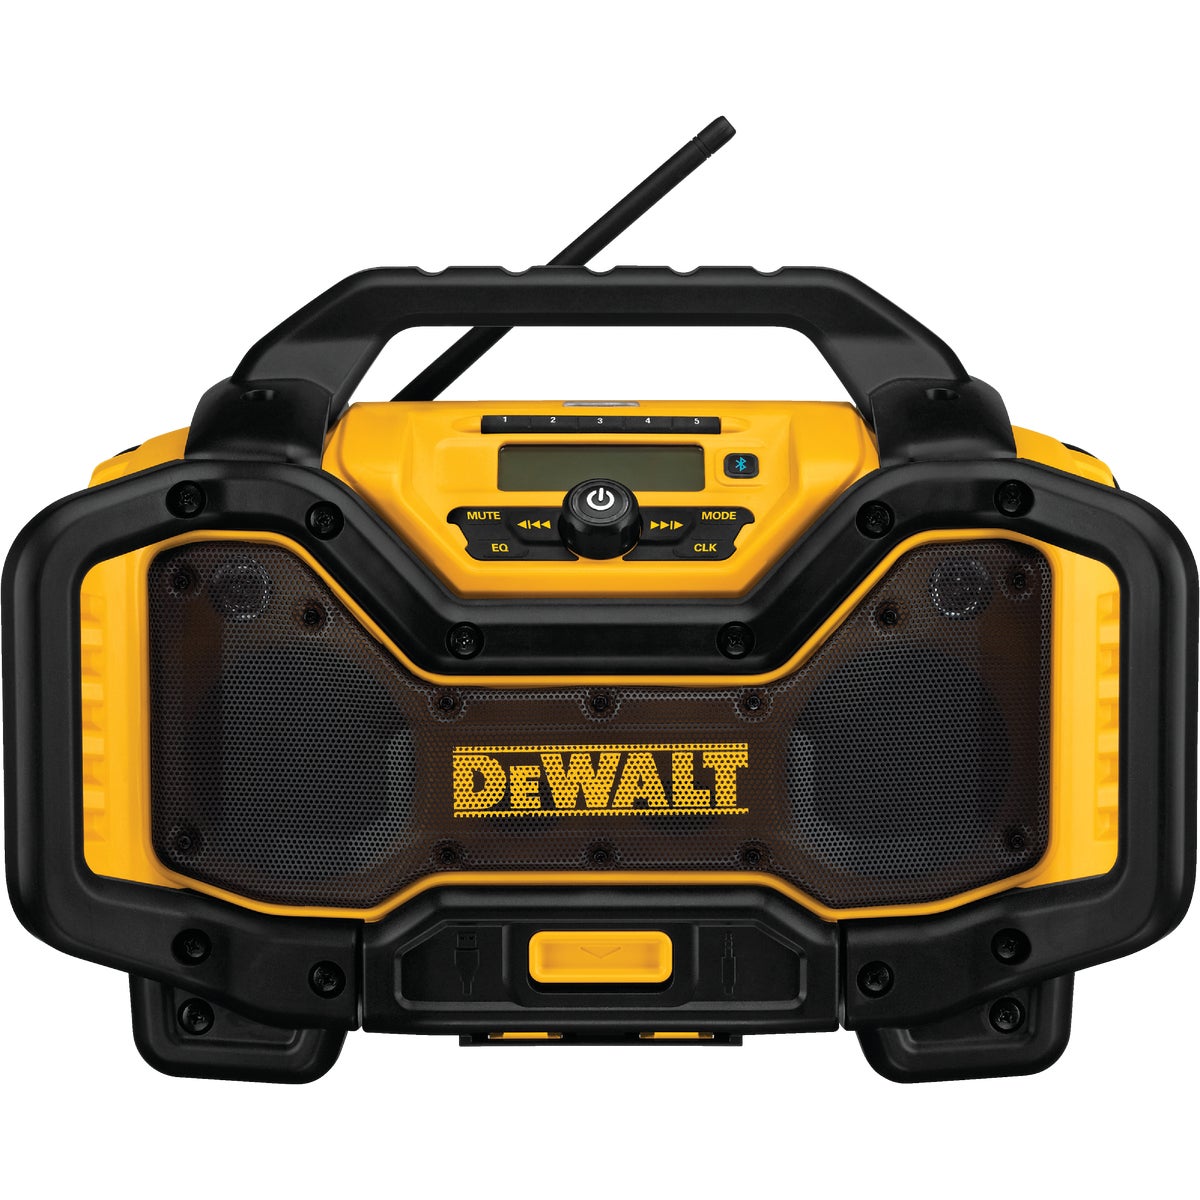 Item 303358, Designed to be the most versatile jobsite radio charger on the market.